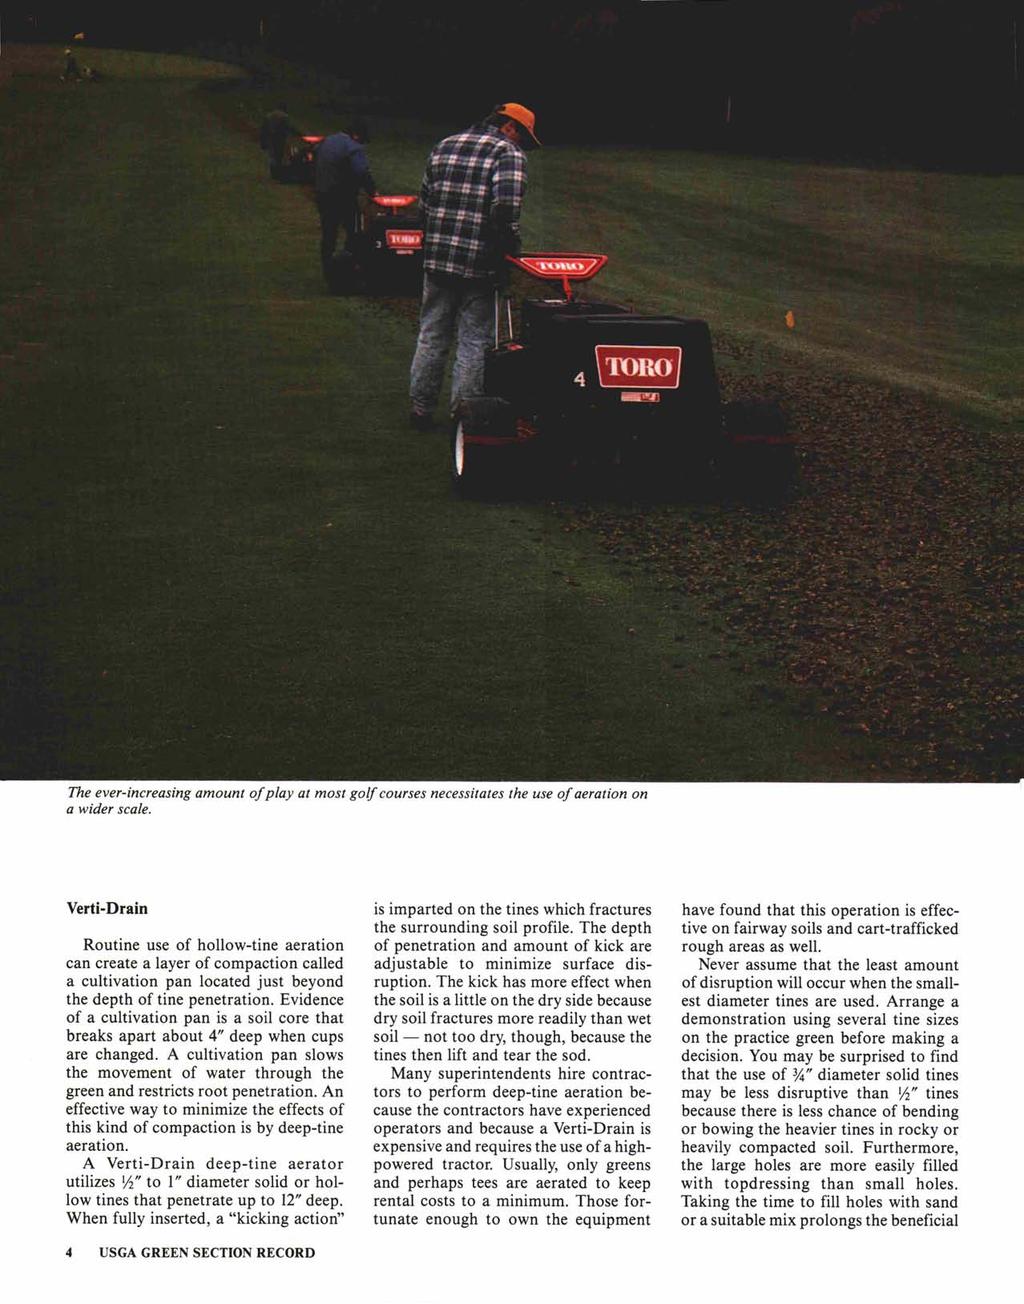 The ever-increasing amount of play at most golf courses necessitates the use of aeration on a wider scale.